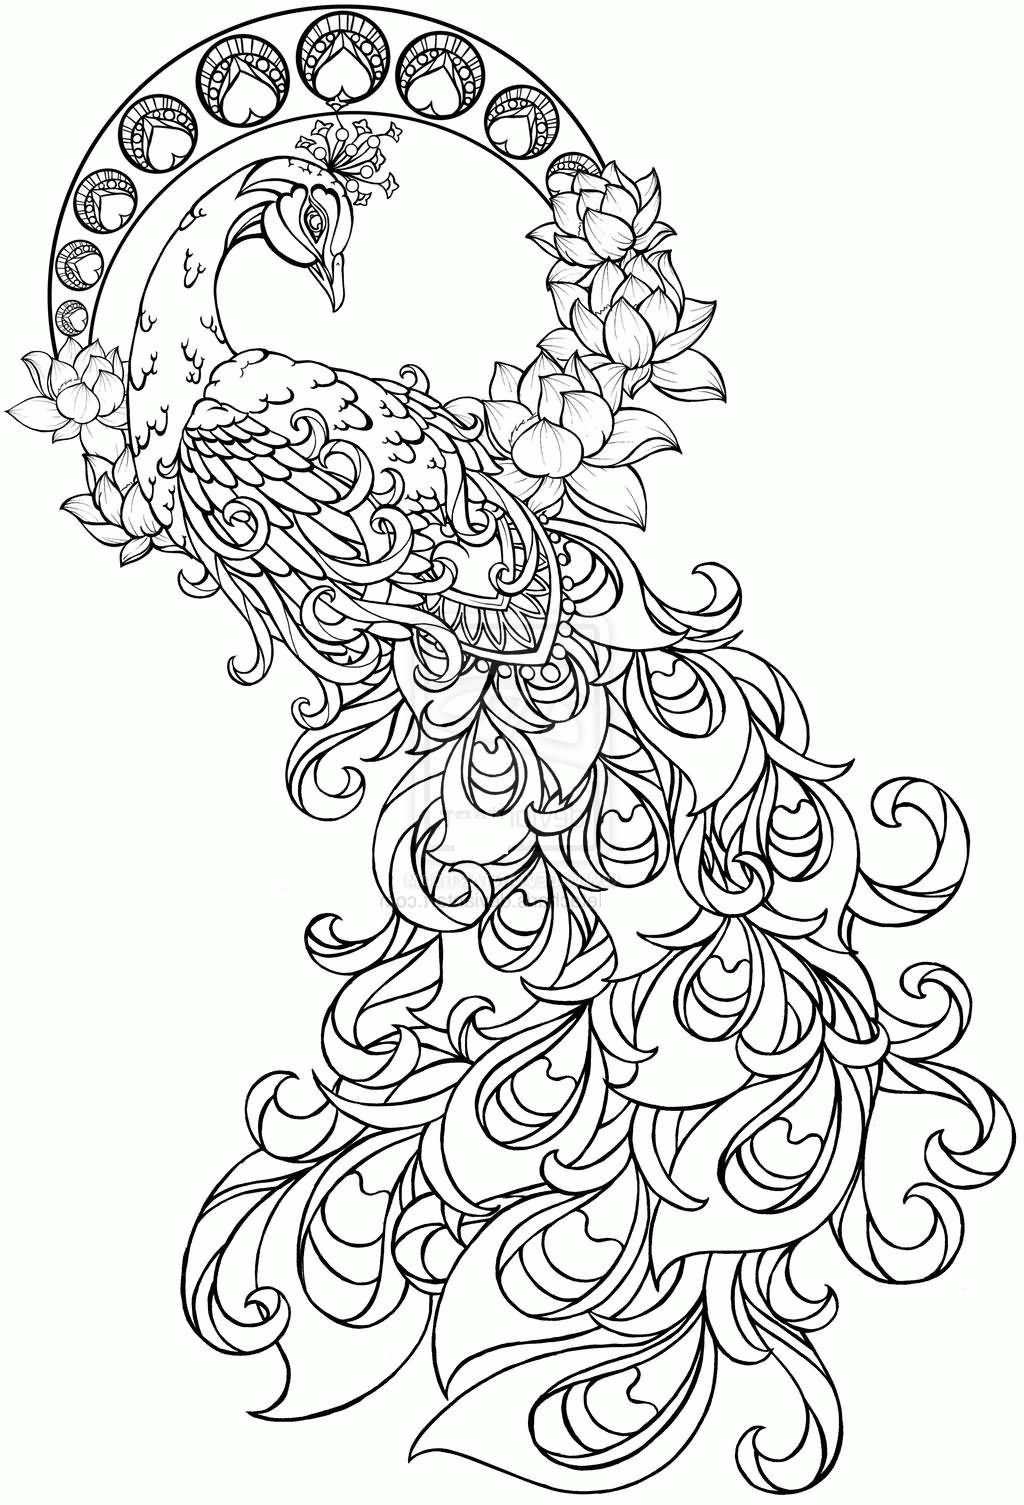 Peacock Coloring Page - Coloring Pages for Kids and for Adults